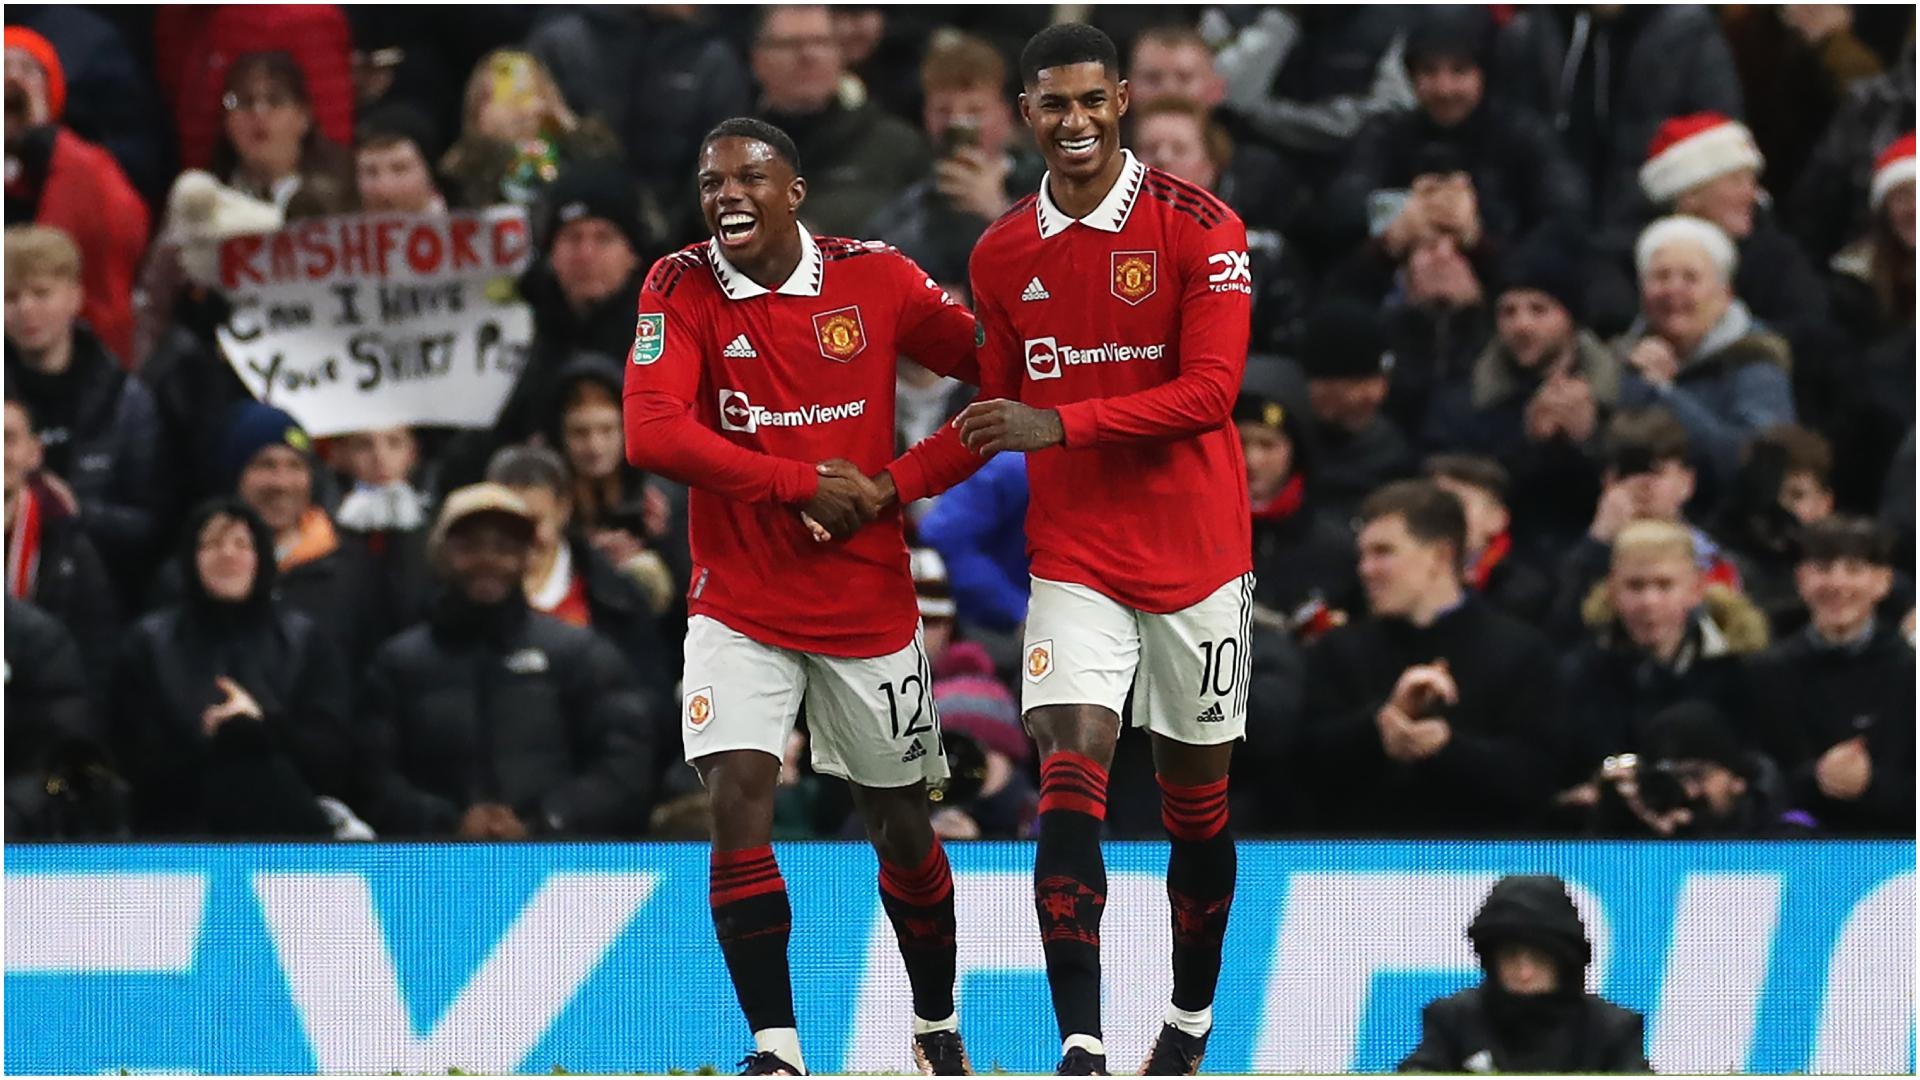 Manchester United advances in the Carabao Cup with 2-0 win - Stream the Video